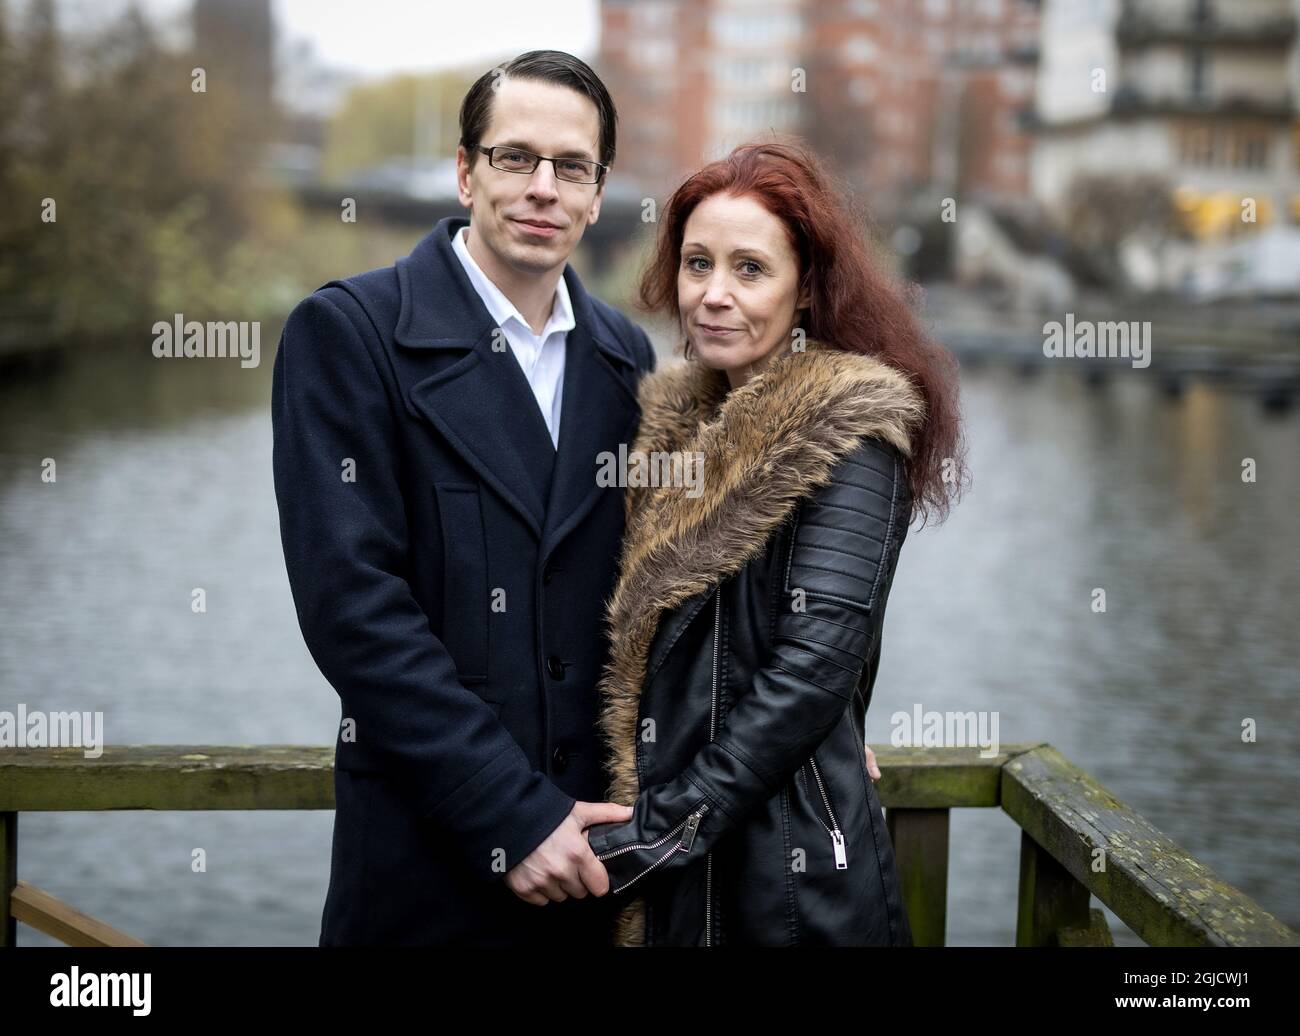 When local Social Democrat politician Nina Burchardt fell in love with right wing Sweden Democrats Parliament member Johnny Skalin she allegedly where pressed to resign from all her political assignments, according to newspaper Aftonbladet. Photo Stefa Jerrevang / Aftonbladet / TT code 2512 ***SWEDEN OUT ***  Stock Photo